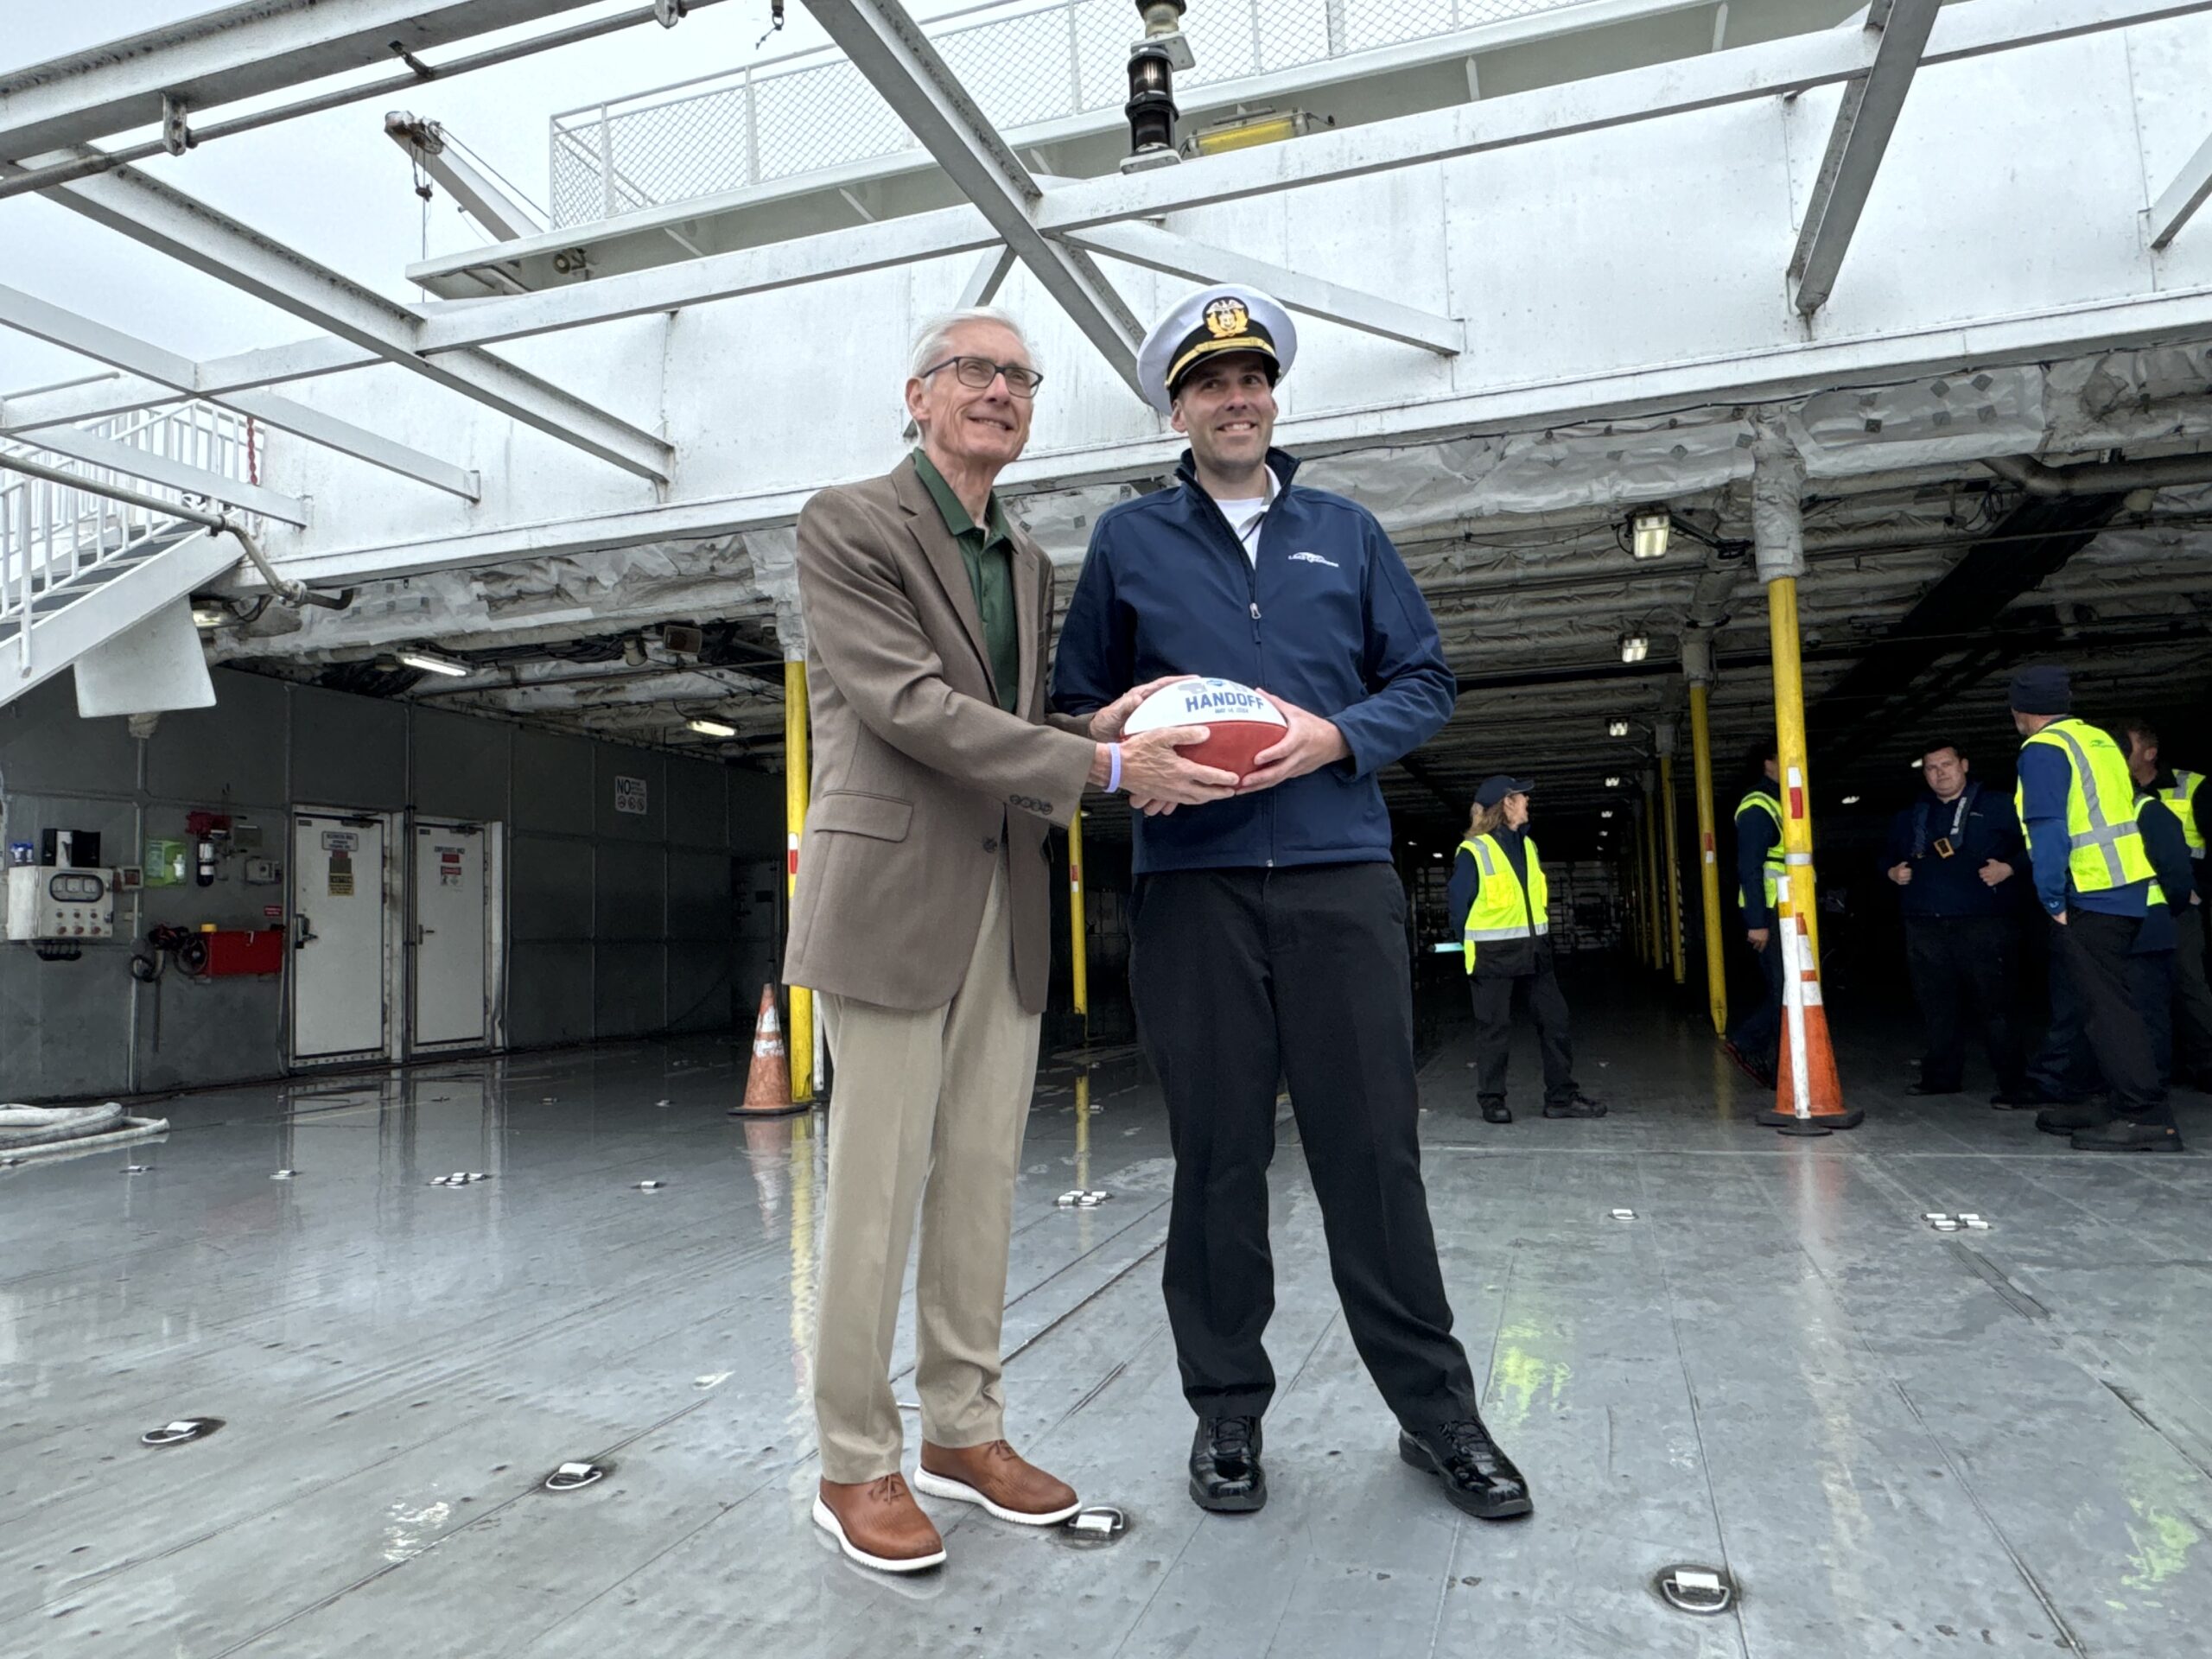 Ceremonial football makes its way from Detroit to Green Bay ahead of 2025 NFL Draft